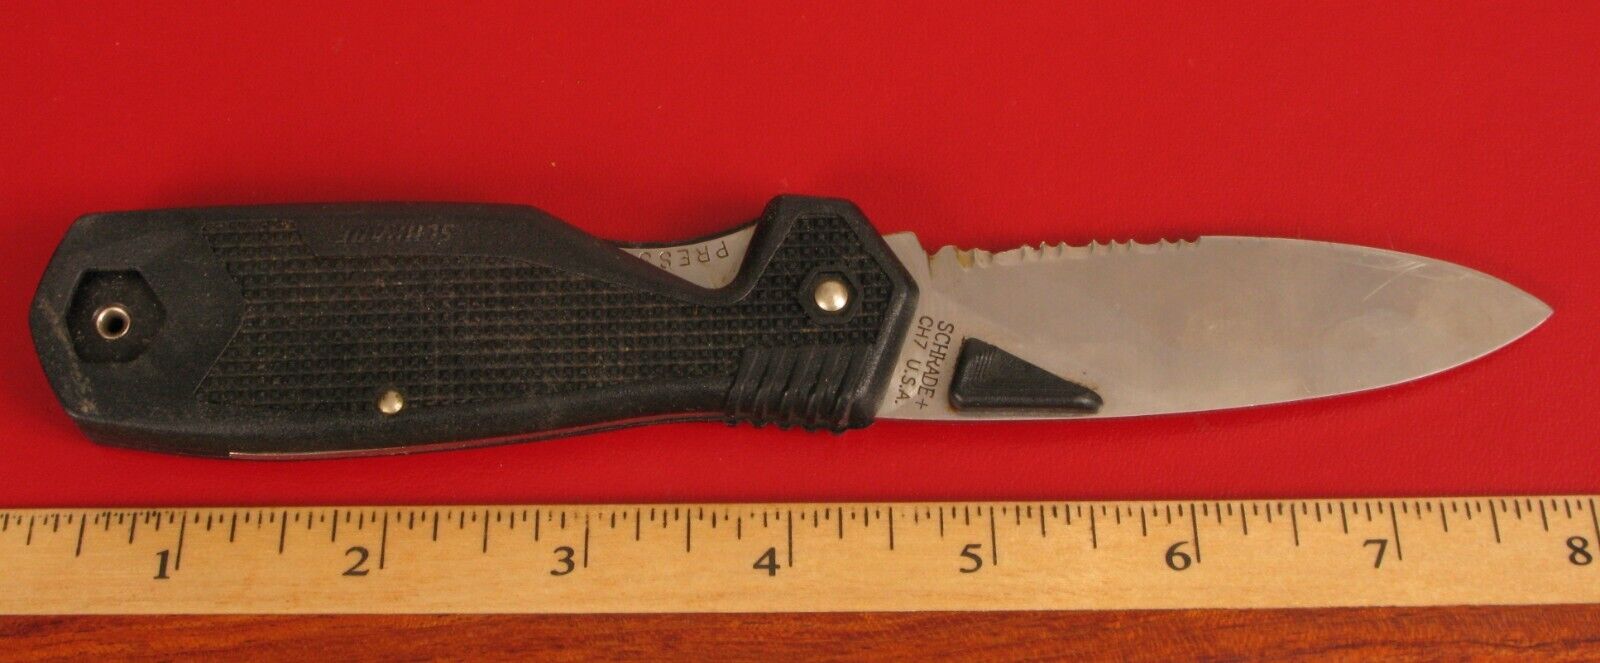 VINTAGE USED SCHRADE CH7 LOCK BLADE SERRATED POCKET KNIFE MADE IN USA 